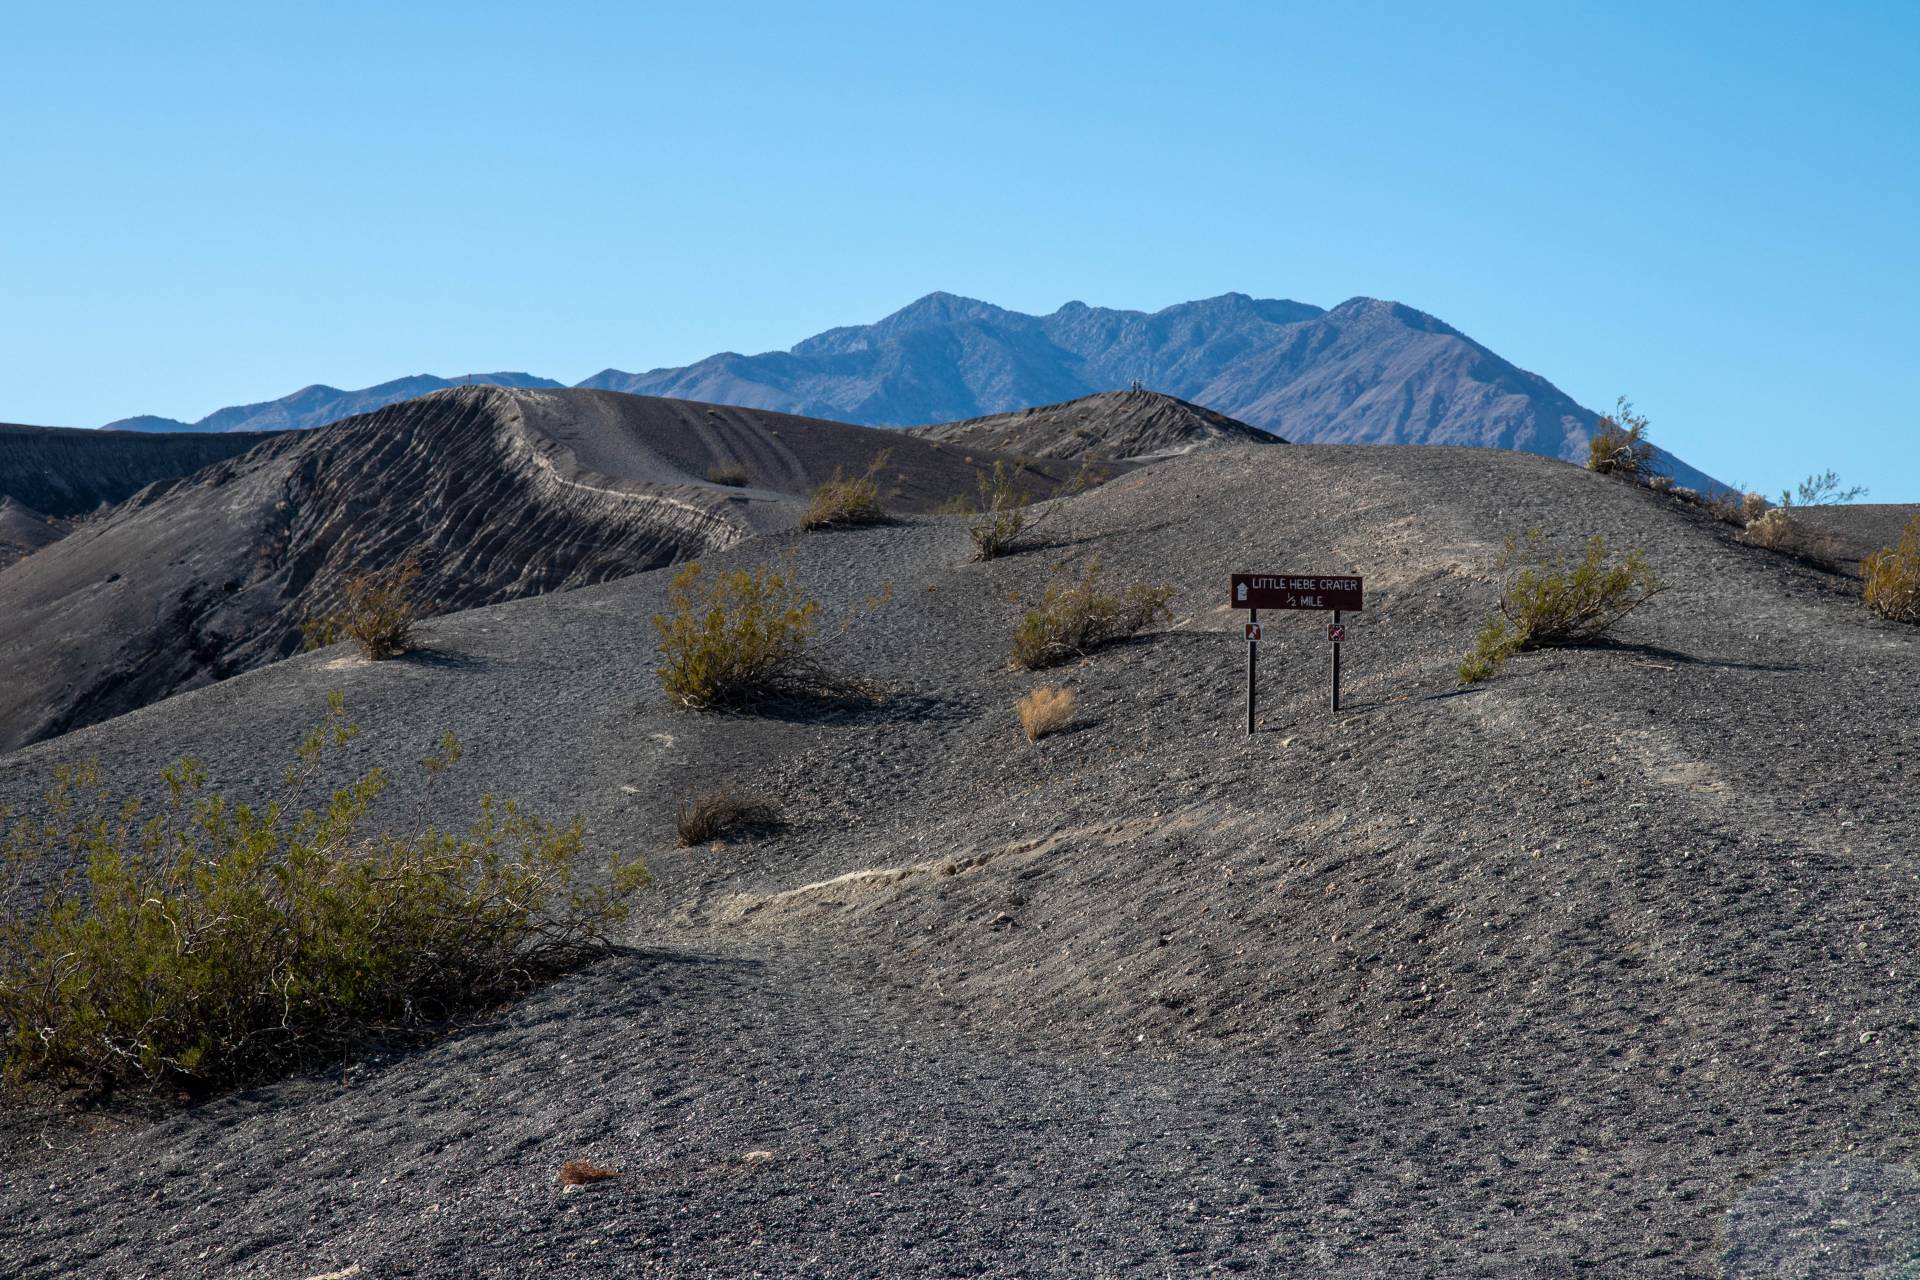 Sign for Little Hebe Crater, Death Valley National Park, California